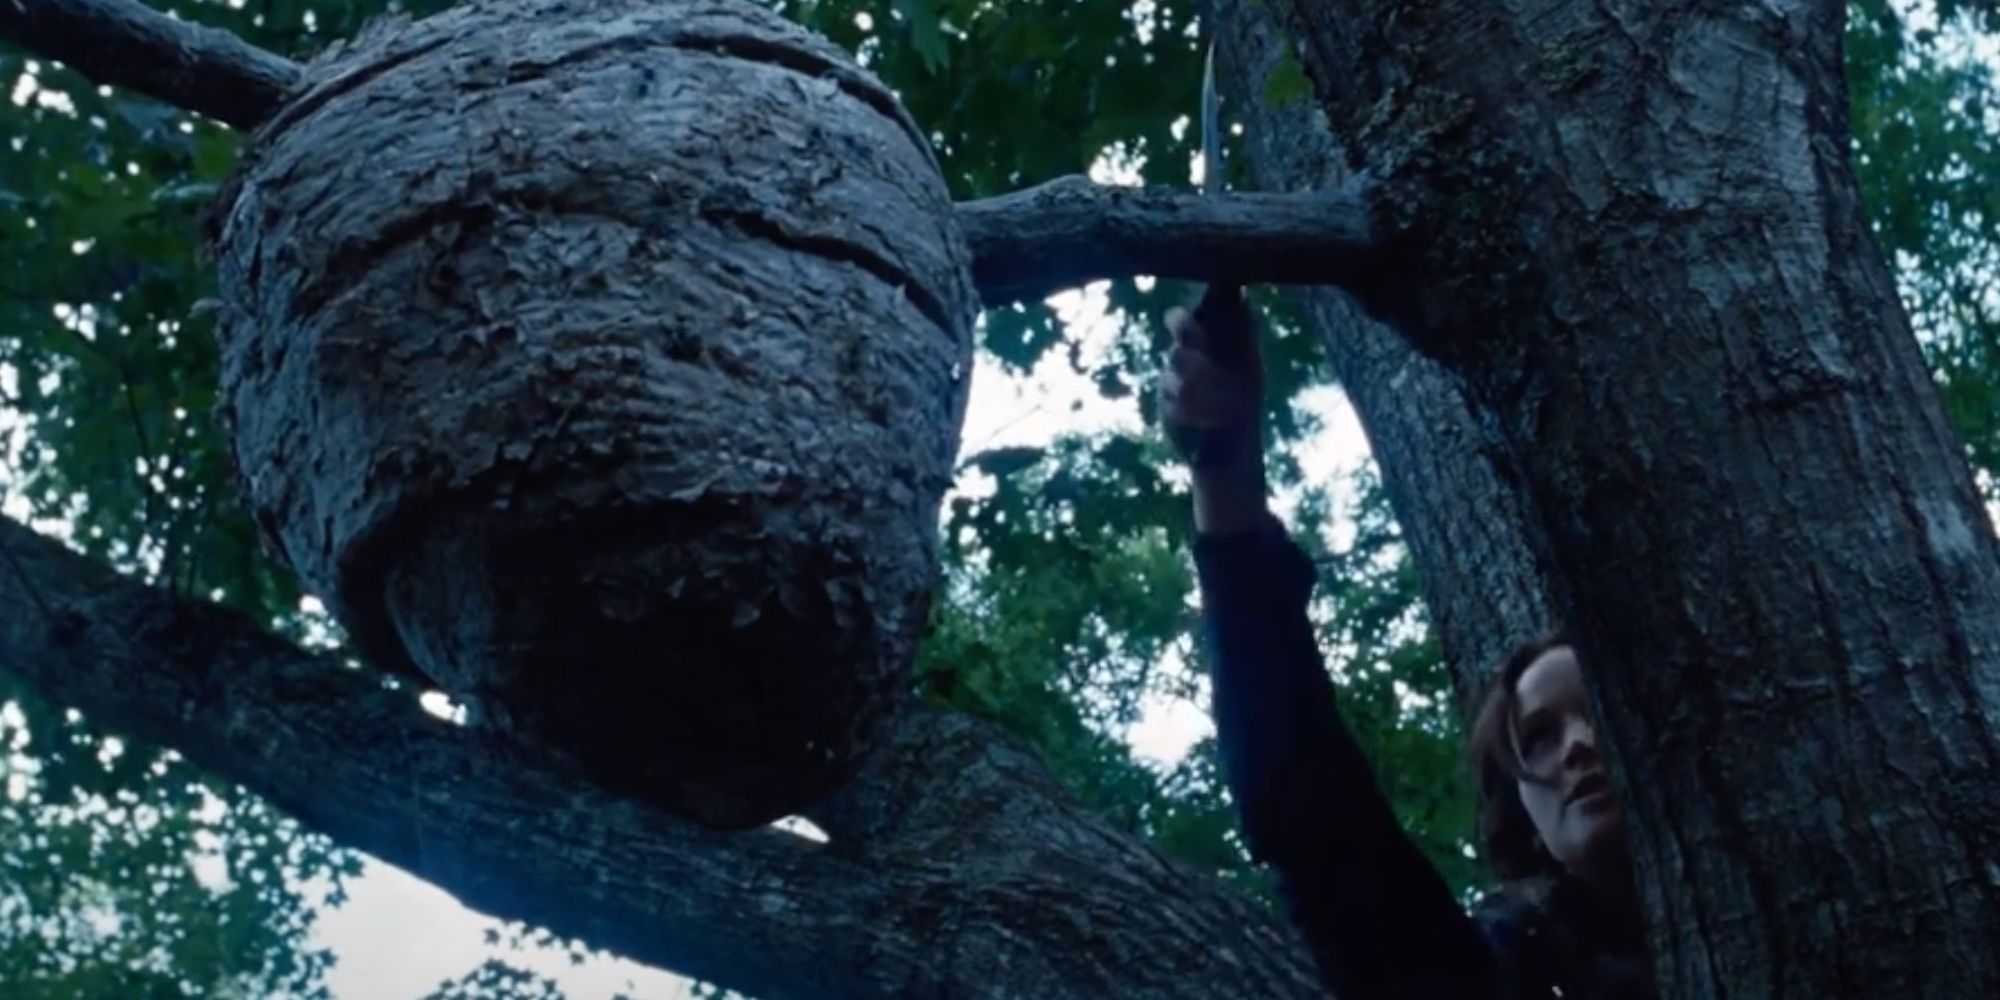 Katniss cuts a tracker jacker nest from a tree in The Hunger Games.